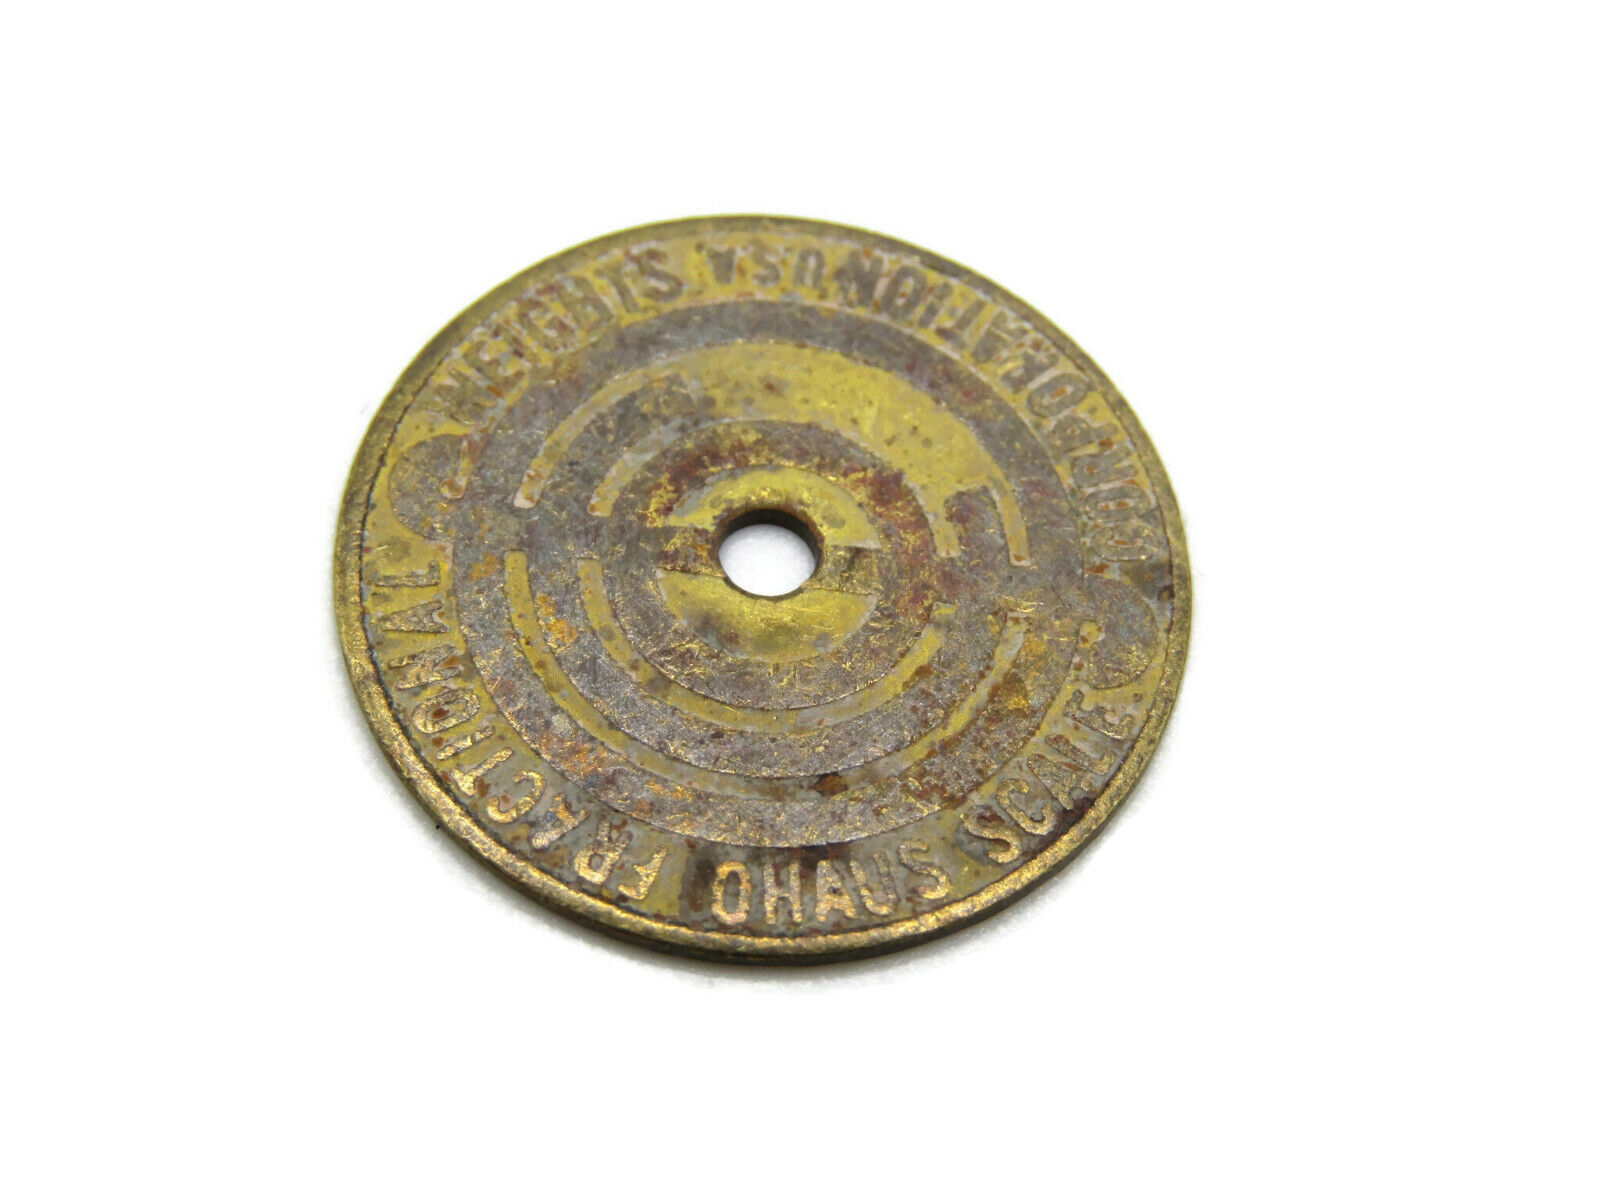 Ohaus Scale Corporation Coin Etched Gold Tone